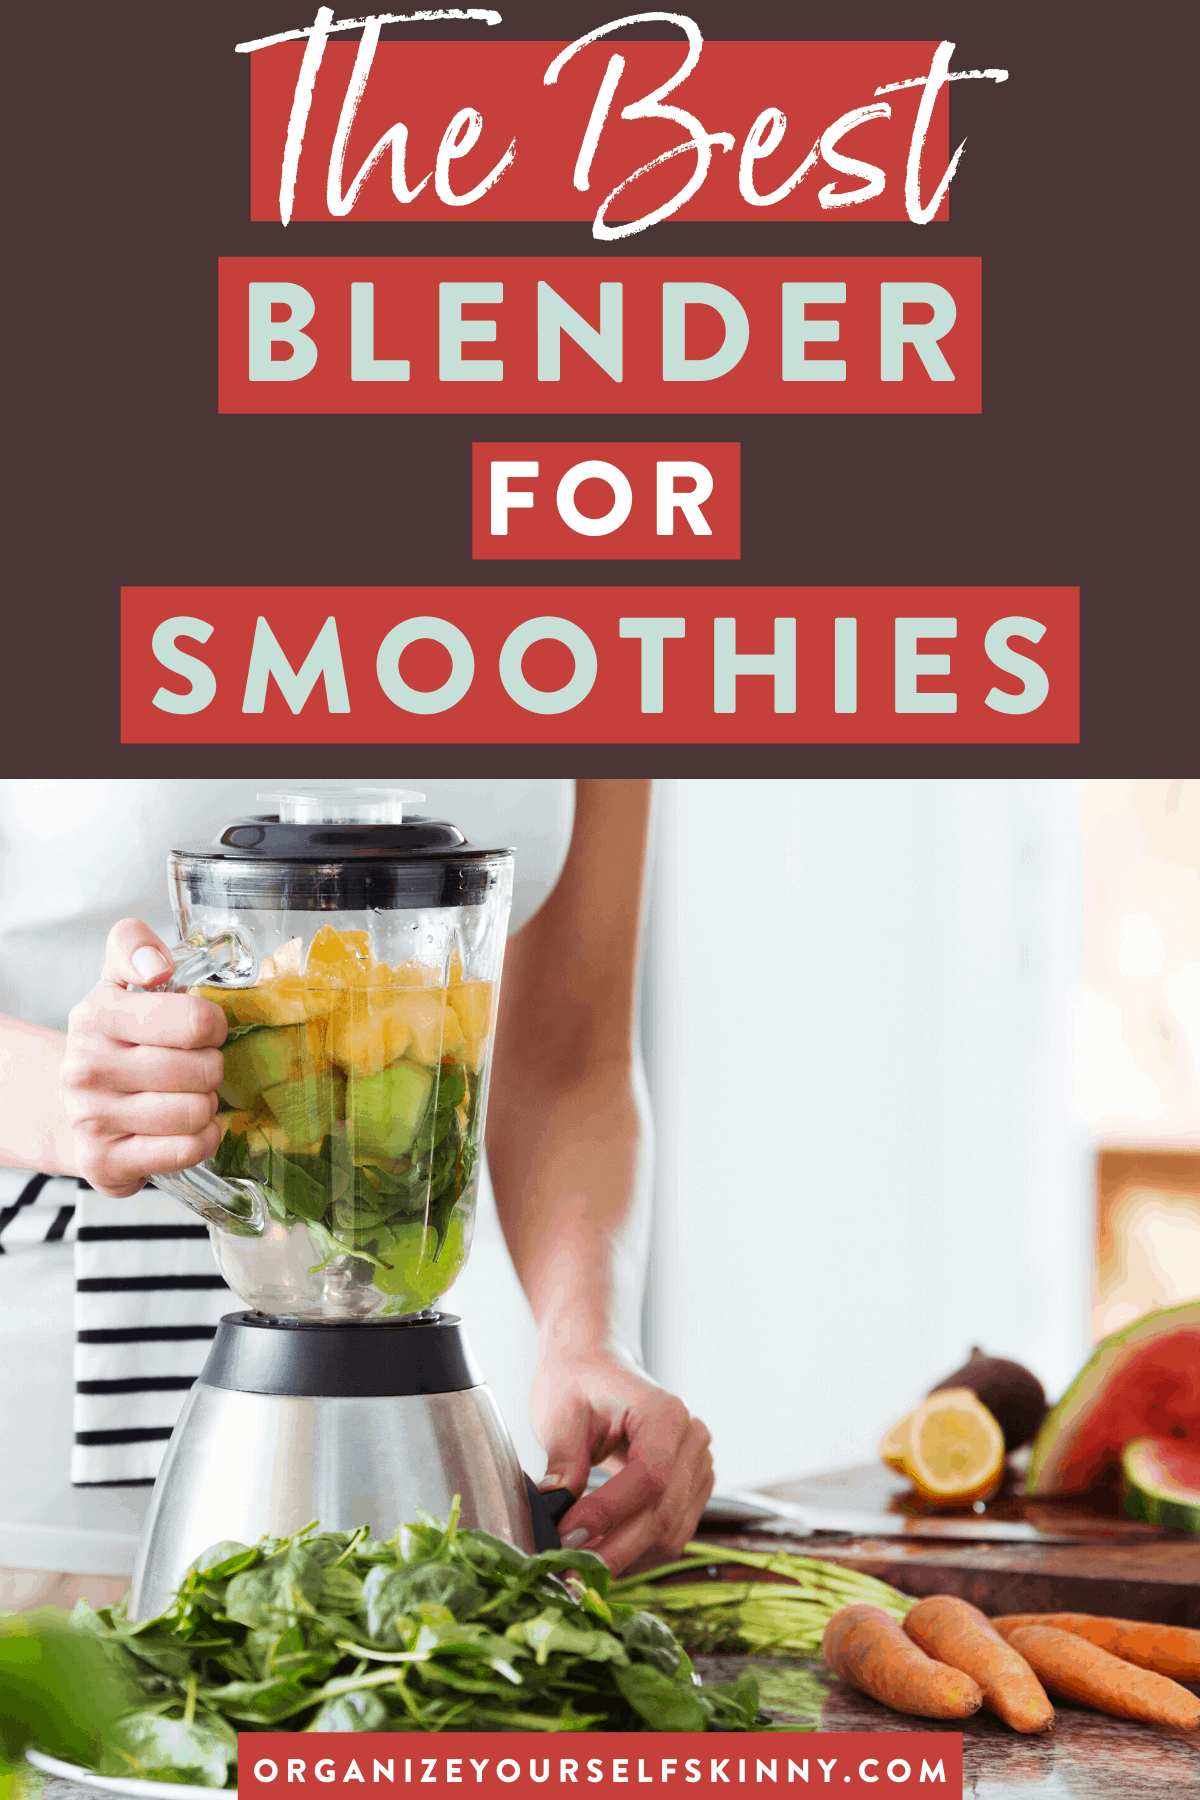 Perfect Smoothies for Cheap: Nutri Ninja Pro Blender Review